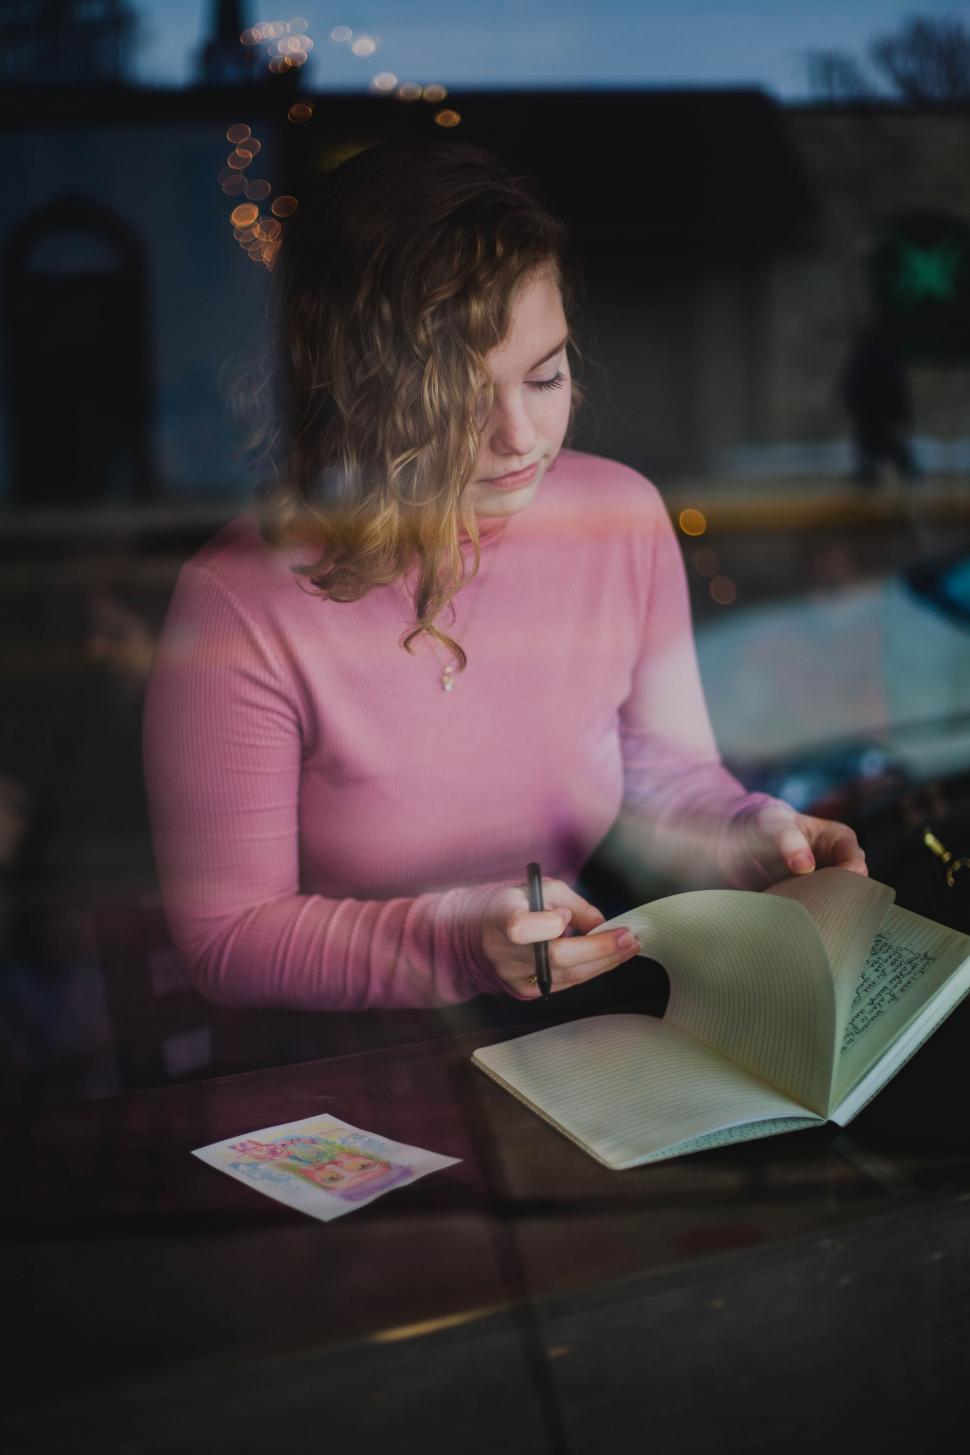 Free Image of Woman Sitting at Table With Book and Pen 